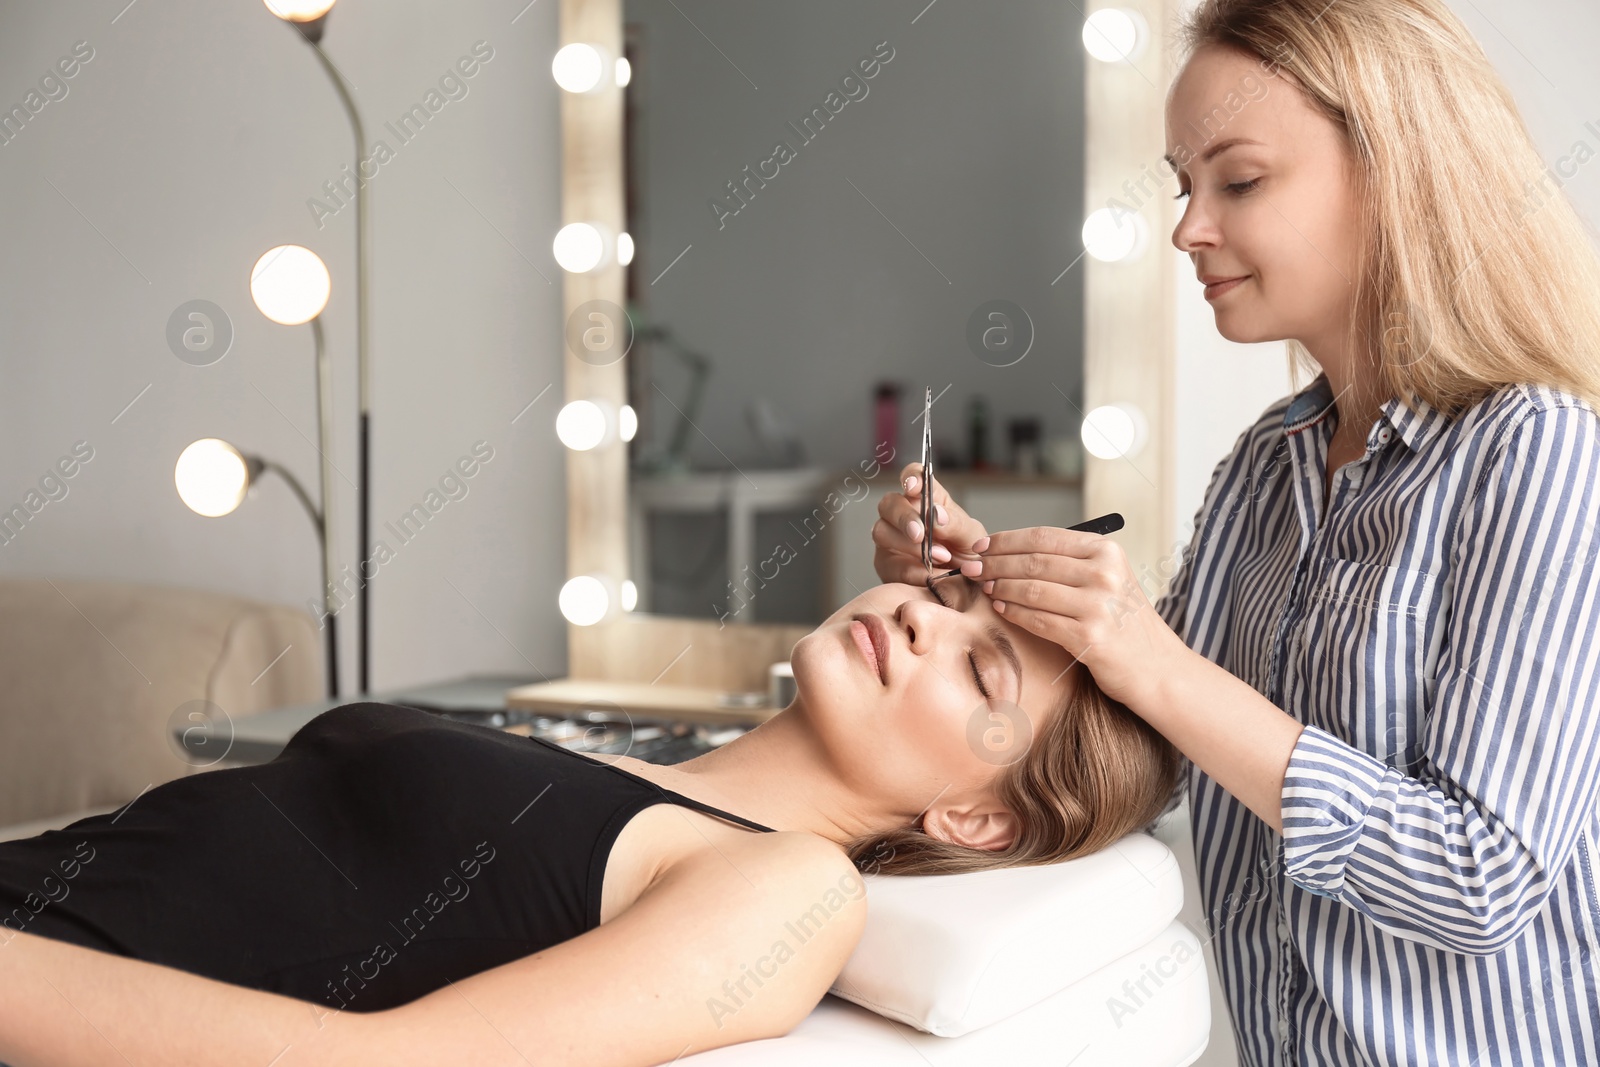 Photo of Young woman undergoing eyelash extensions procedure in salon